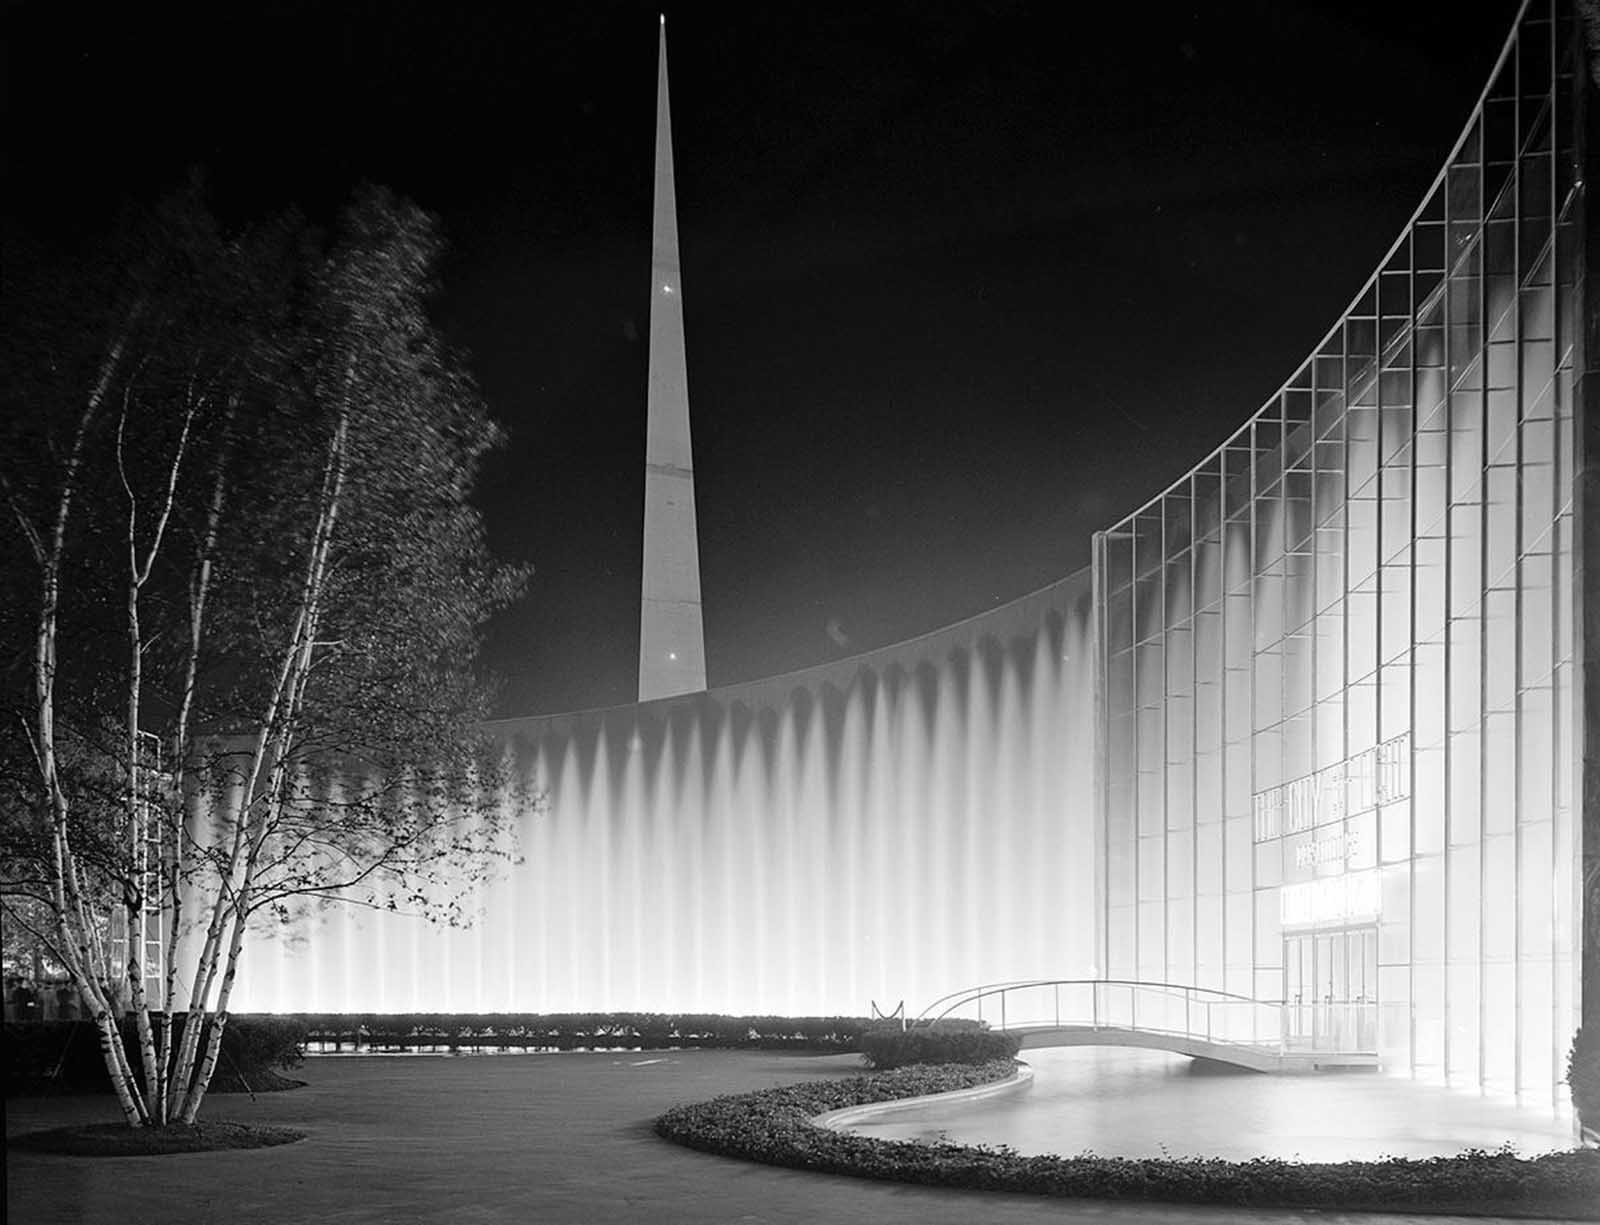 A World's Fair night views of Consolidated Edison's fountains, on June 24, 1939.